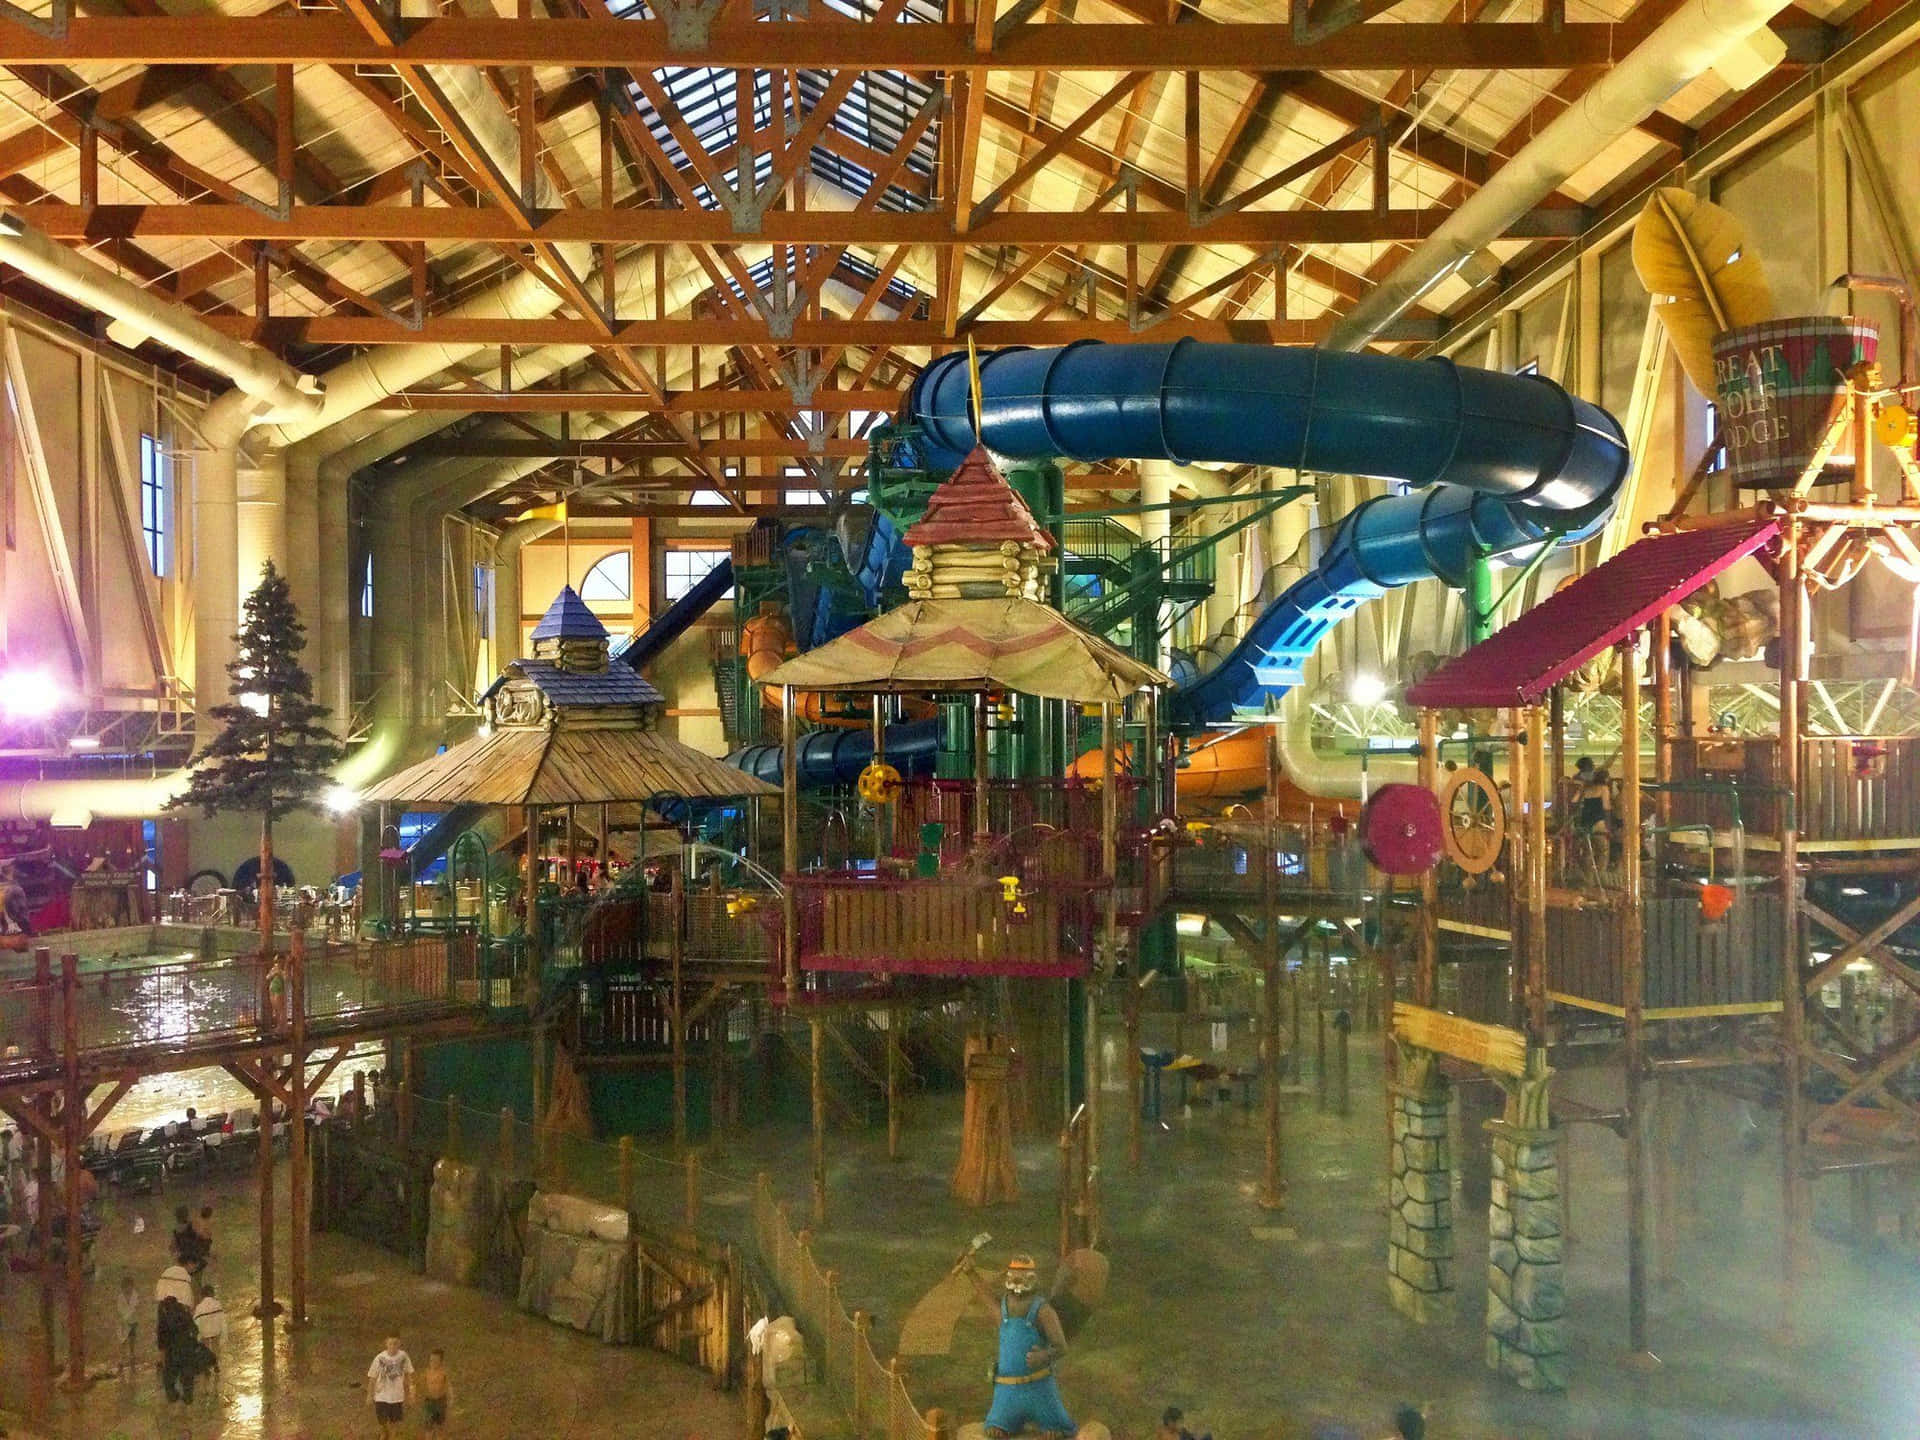 A Large Indoor Water Park With Many People